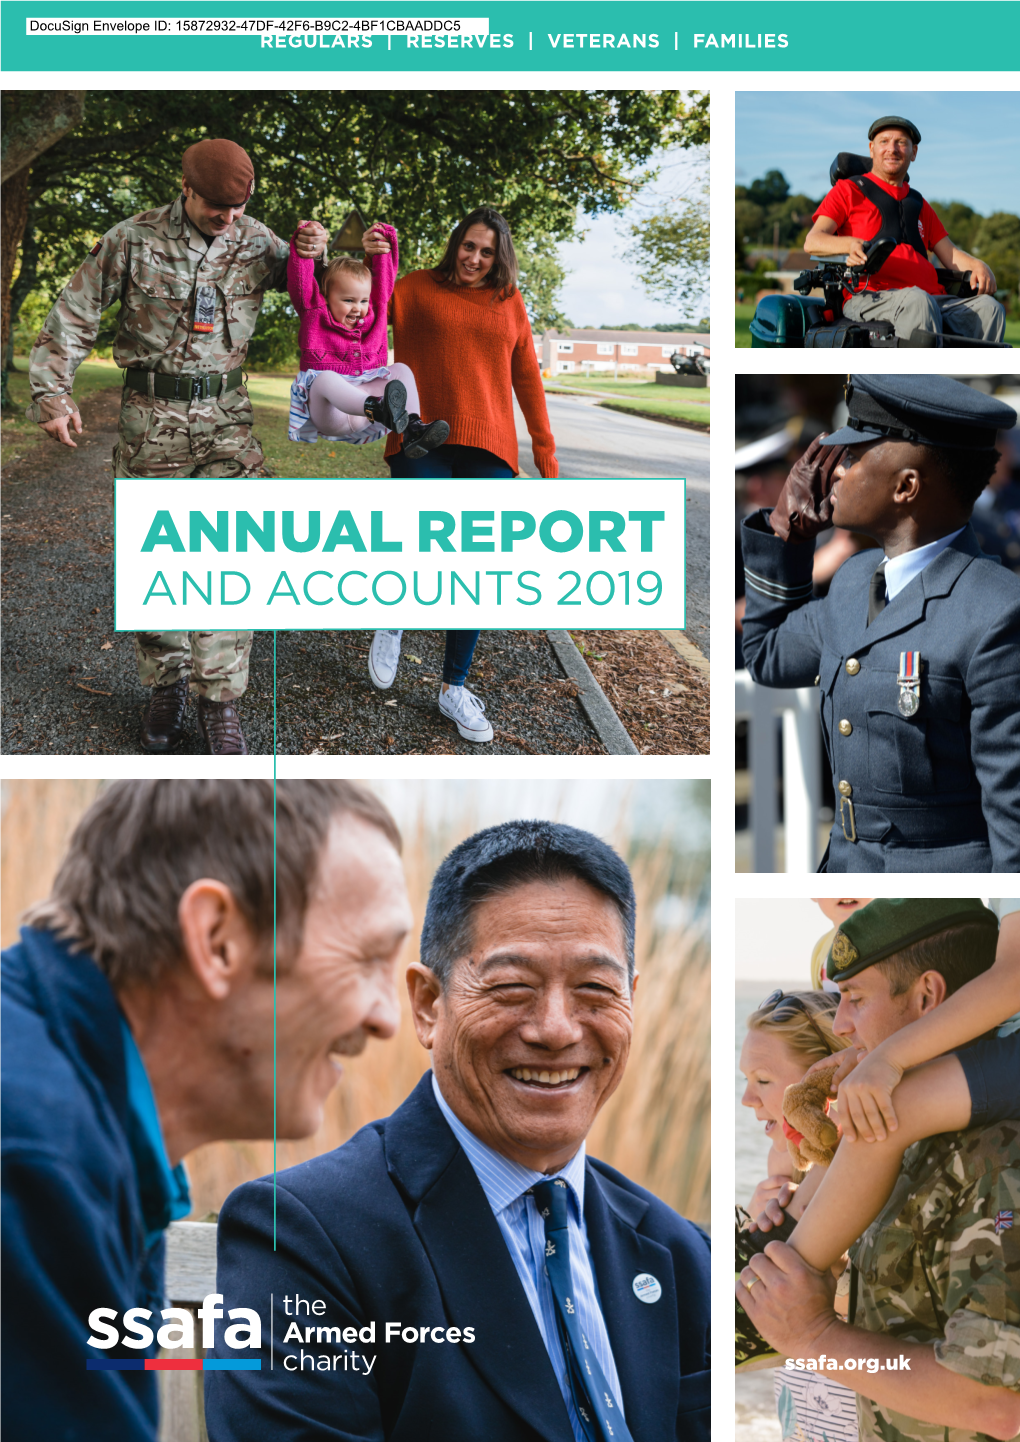 Our Annual Report and Accounts for 2019